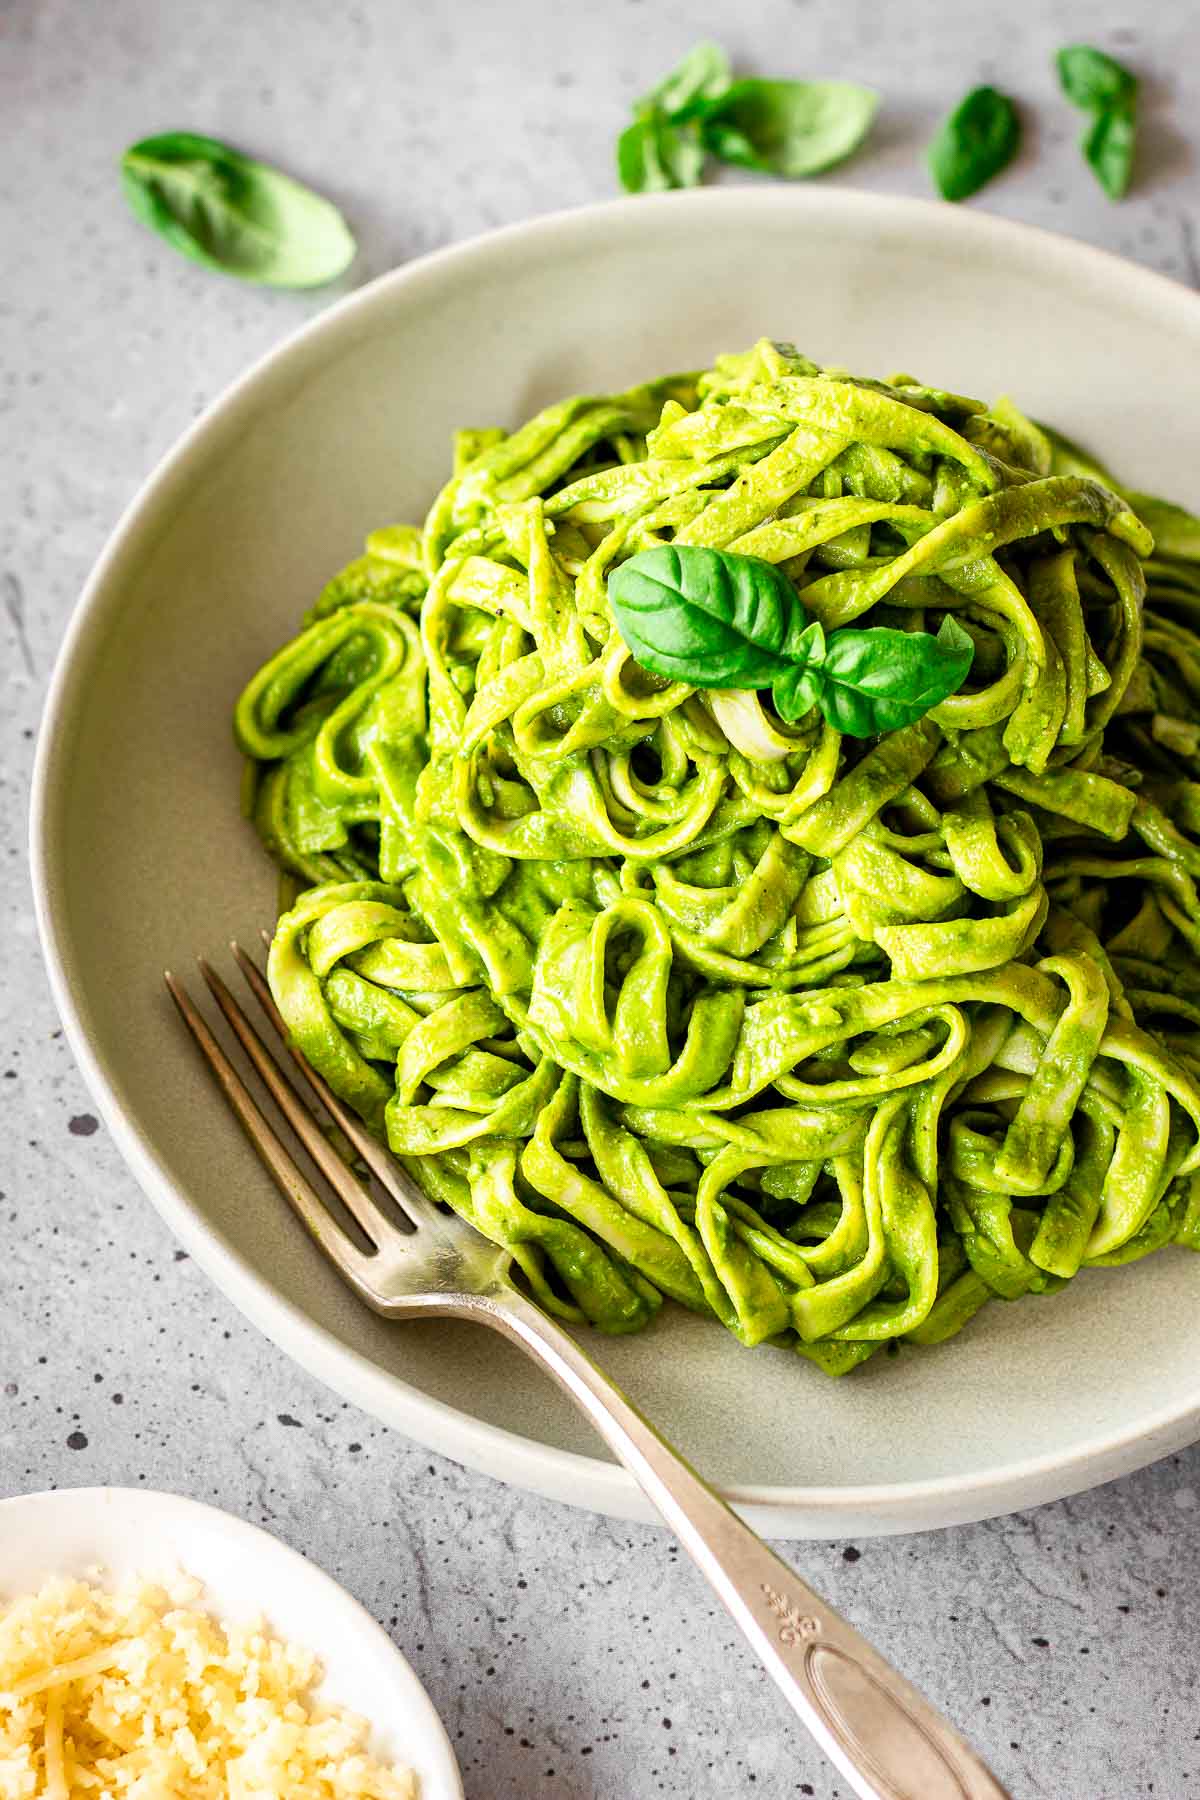 Grey plate of creamy spinach pasta sauce on fettuccine. Dish is decorated with basil leaves and there is a fork nestled into the plate. A dish of vegan cheese is off to one side.